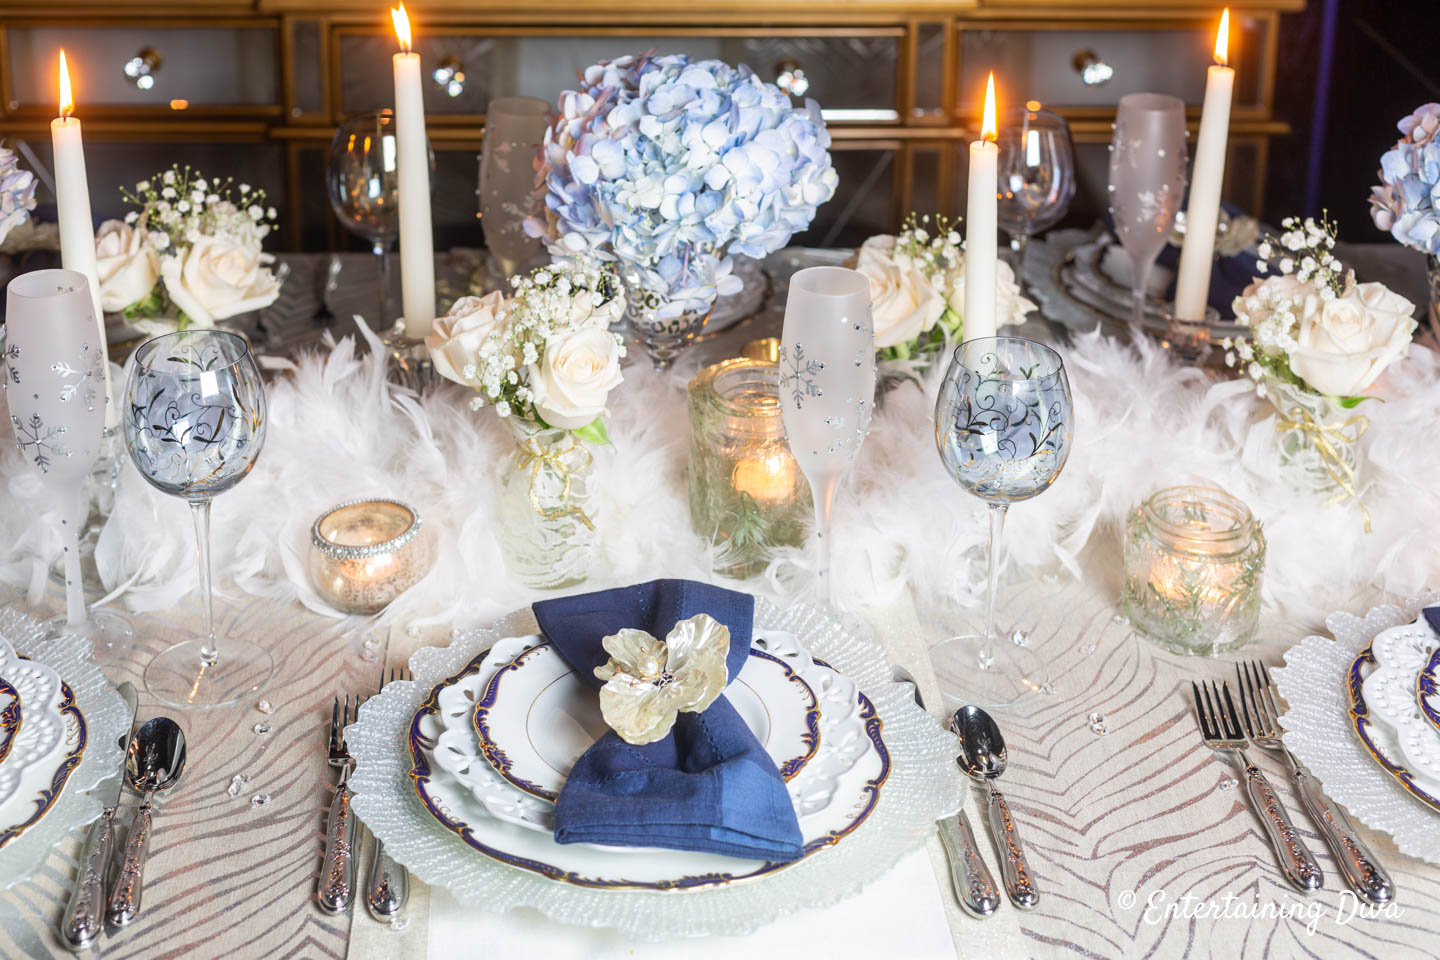 Blue, white, silver and gold winter wonderland table decor